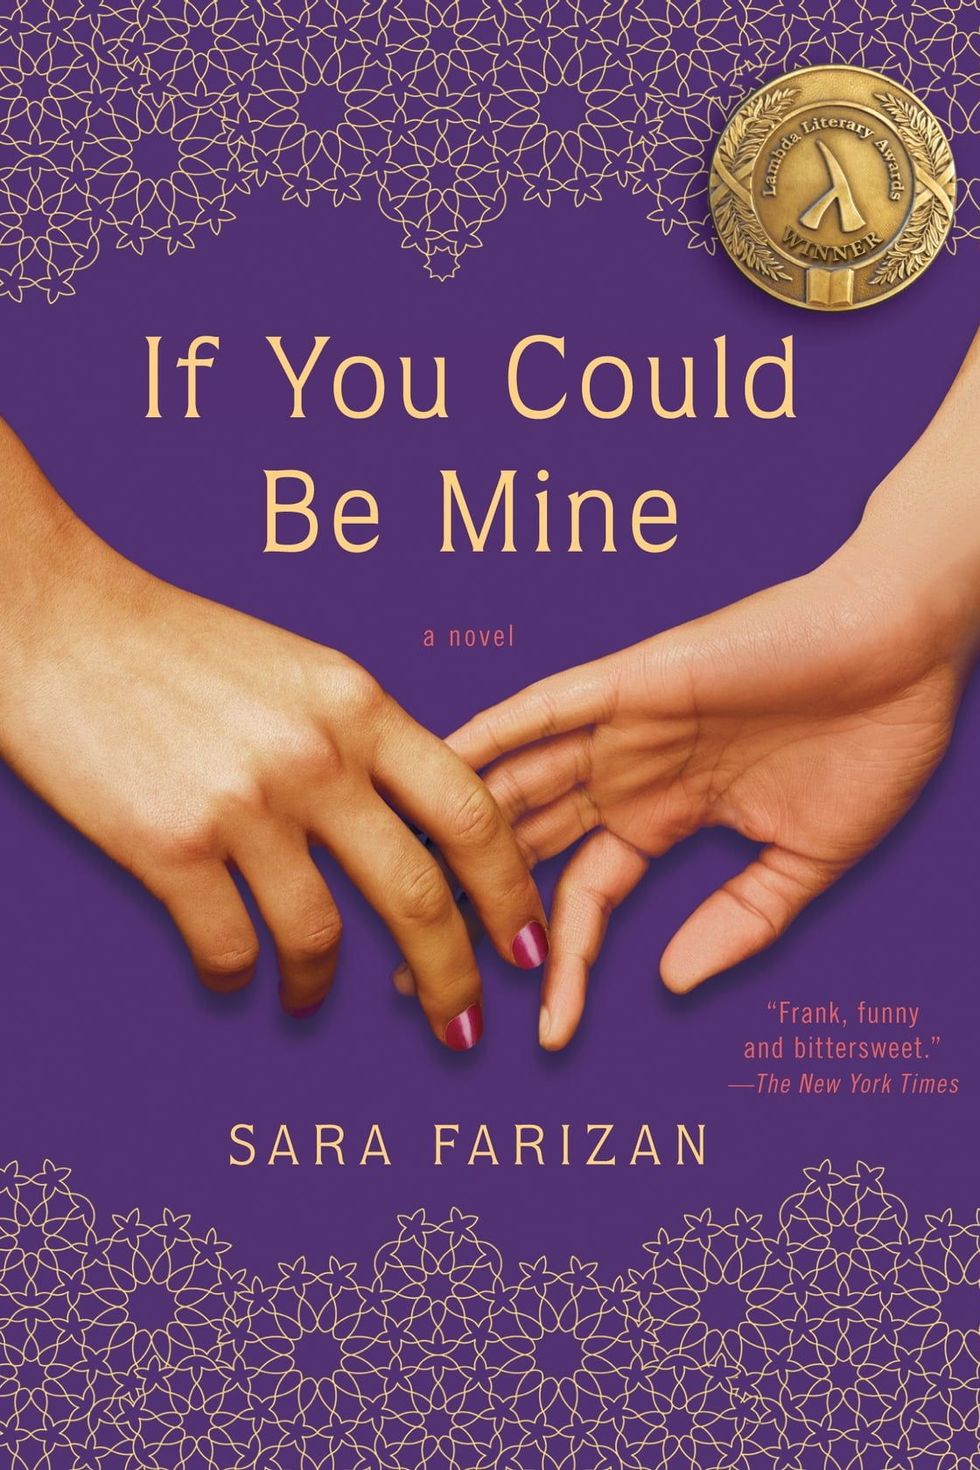 <i>If You Could Be Mine</i>, by Sara Farizan